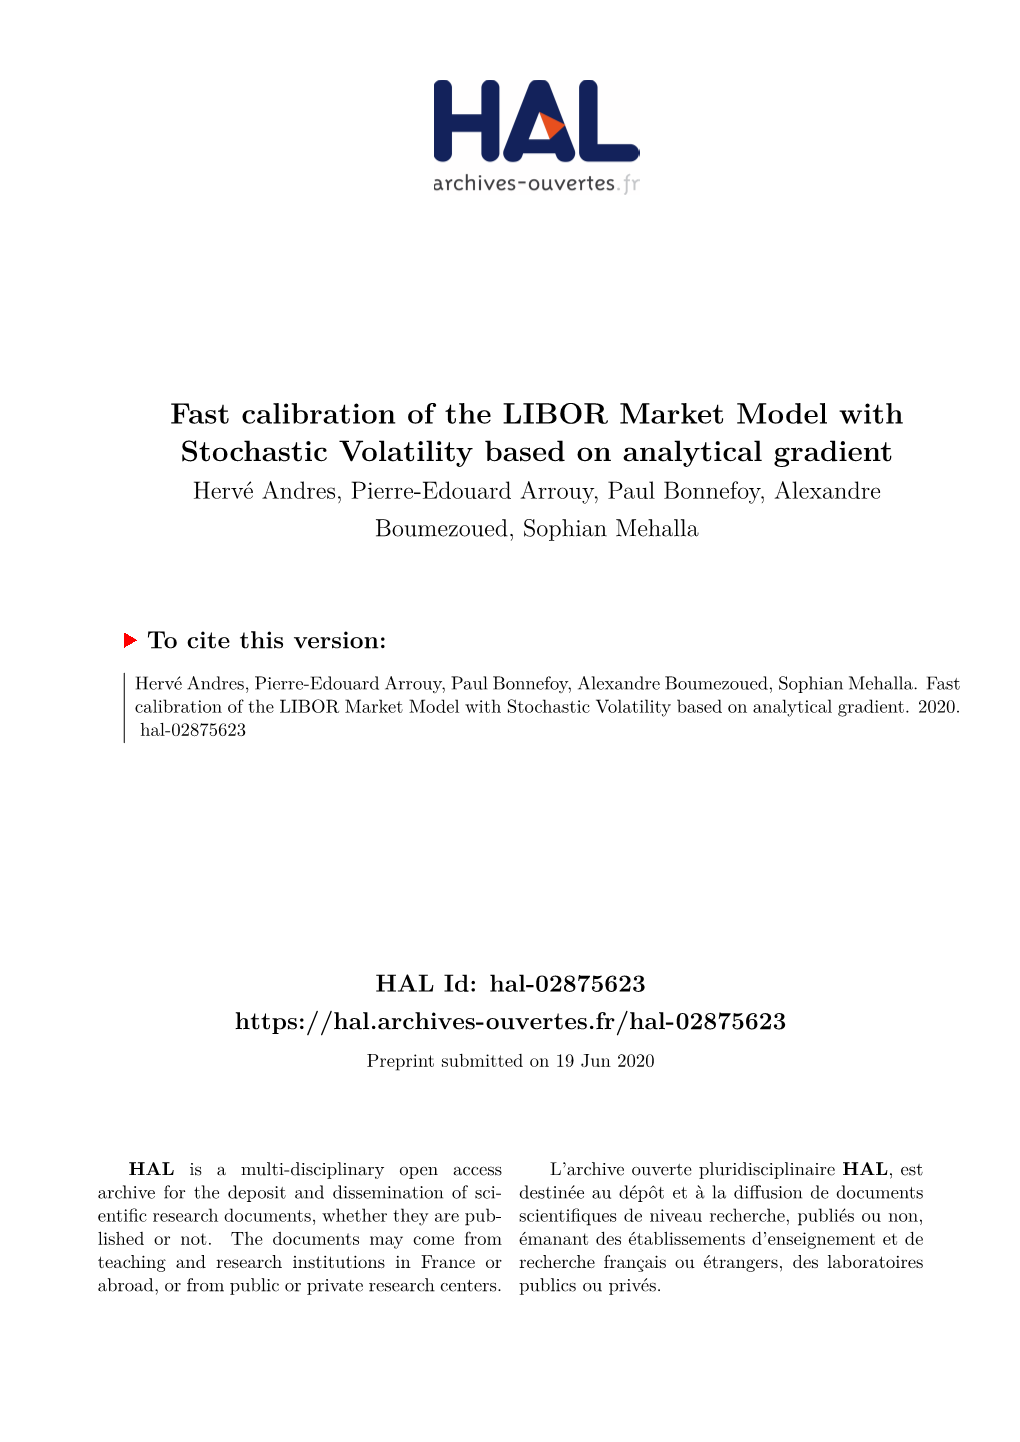 Fast Calibration of the LIBOR Market Model with Stochastic Volatility Based on Analytical Gradient